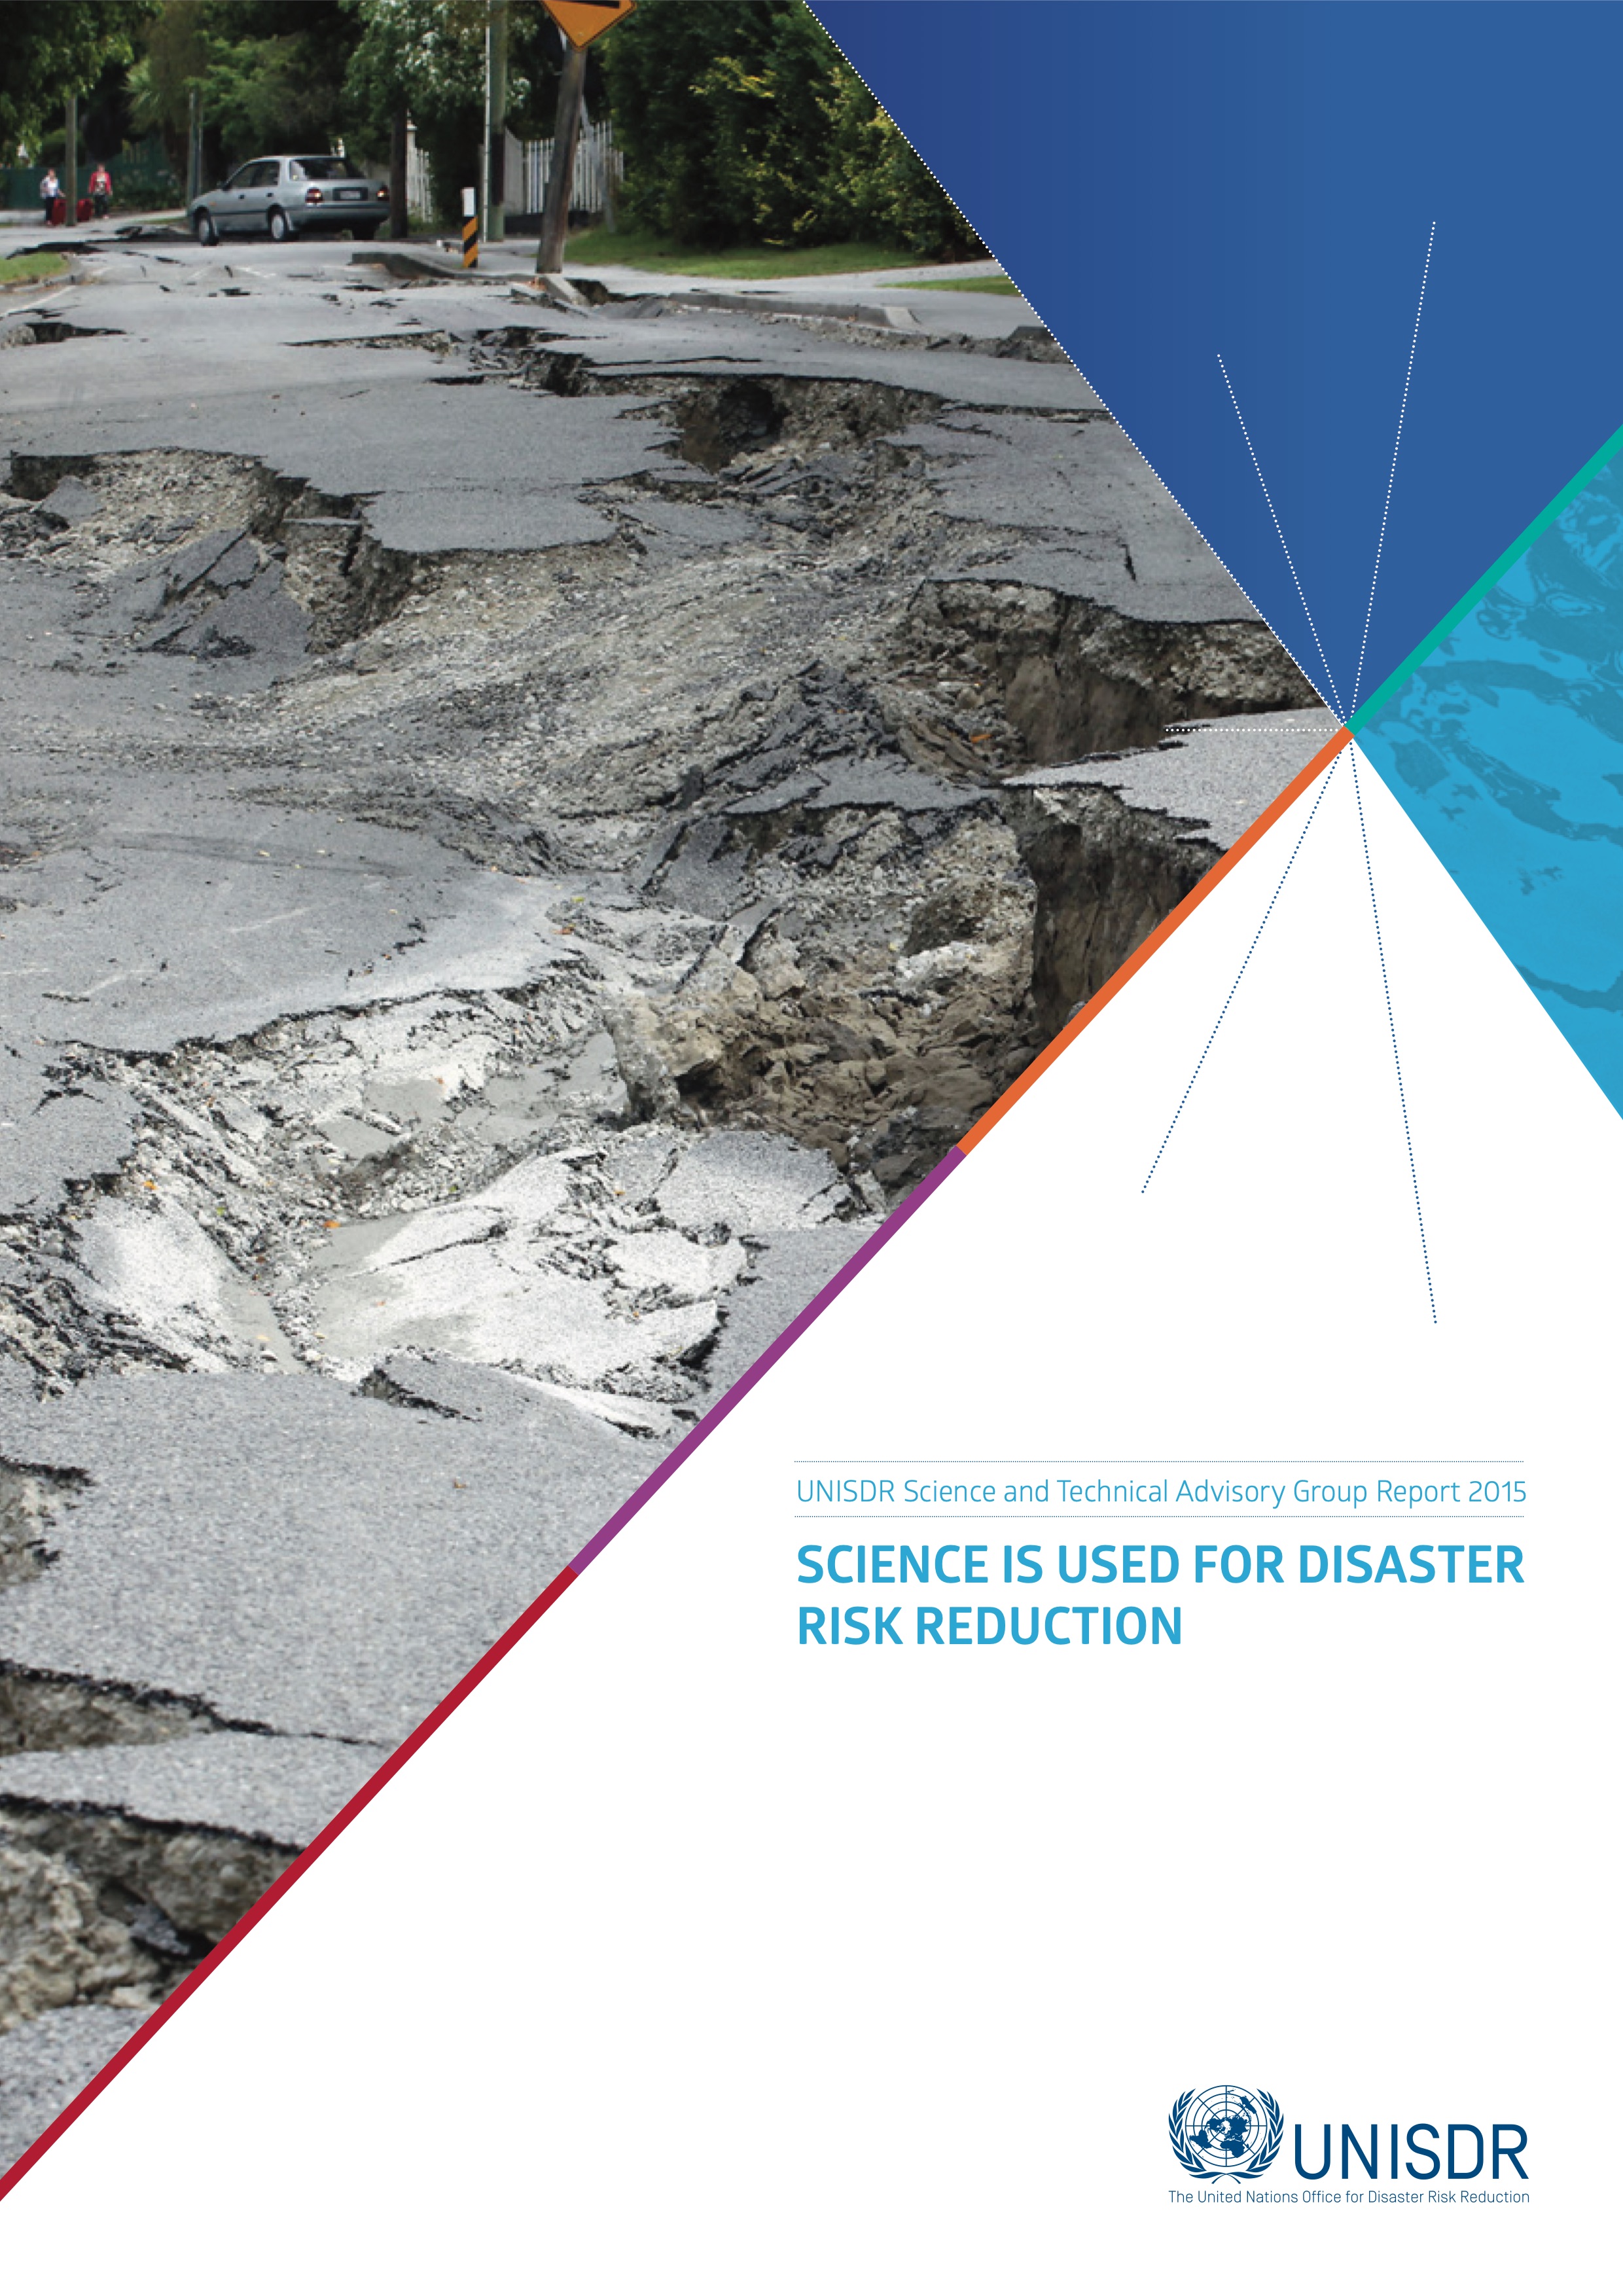 Science is used for Disaster Risk Reduction